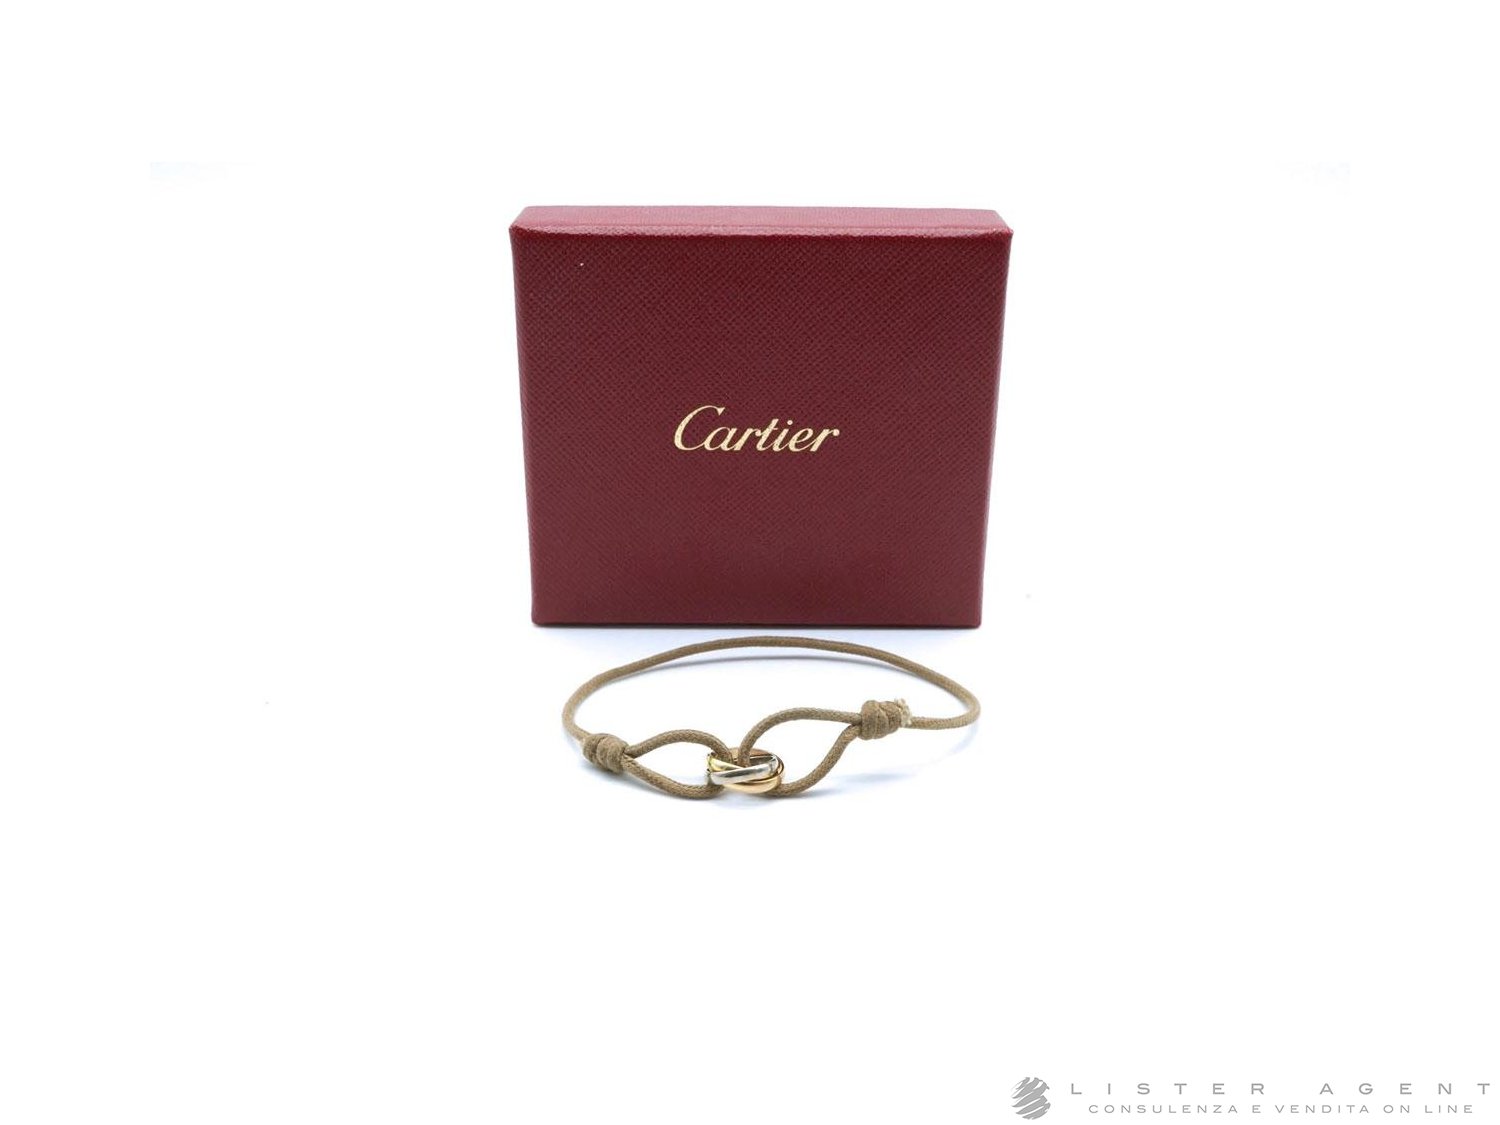 CRB6016700 - Trinity bracelet - White gold, yellow gold, rose gold - Cartier